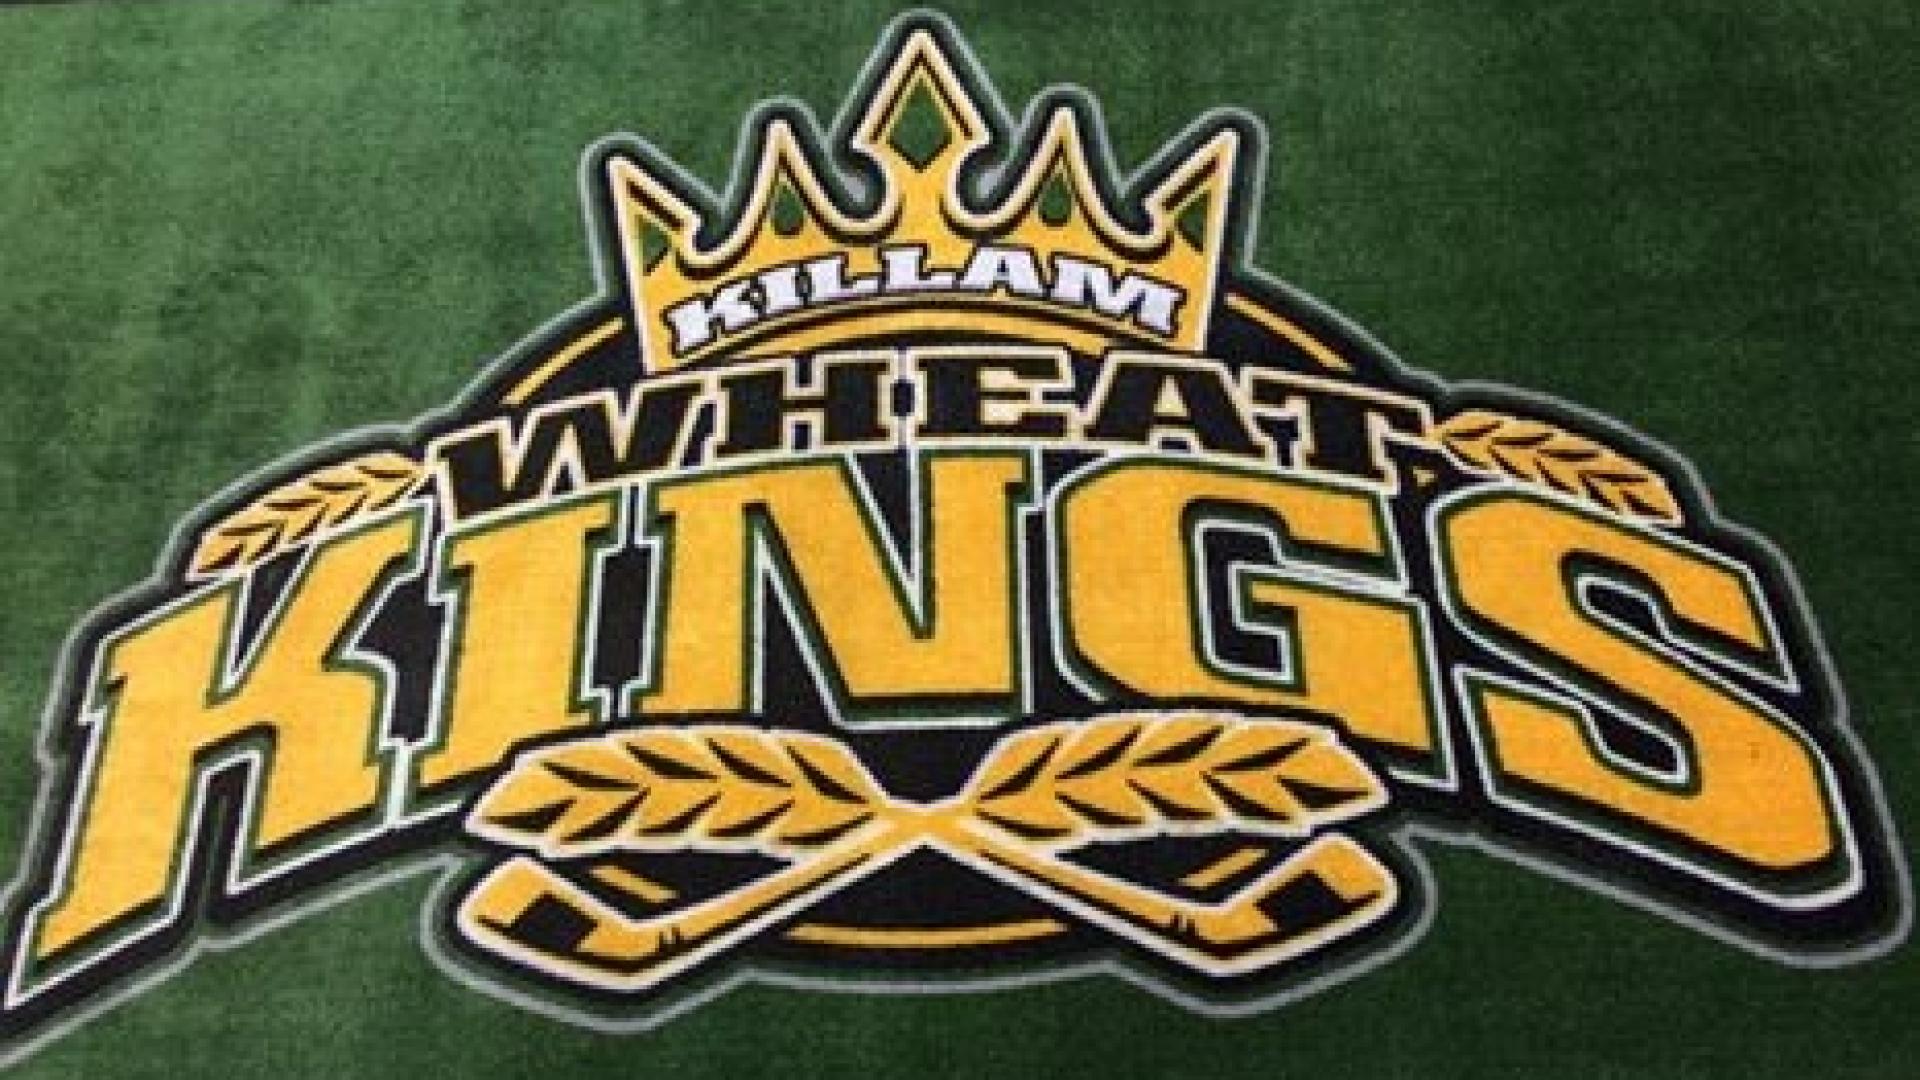 Team logo for the Killam Wheat Kings. The logo has golden lettering on a green background. There is a crown on the top and two hockey sticks with wheat at their handles.